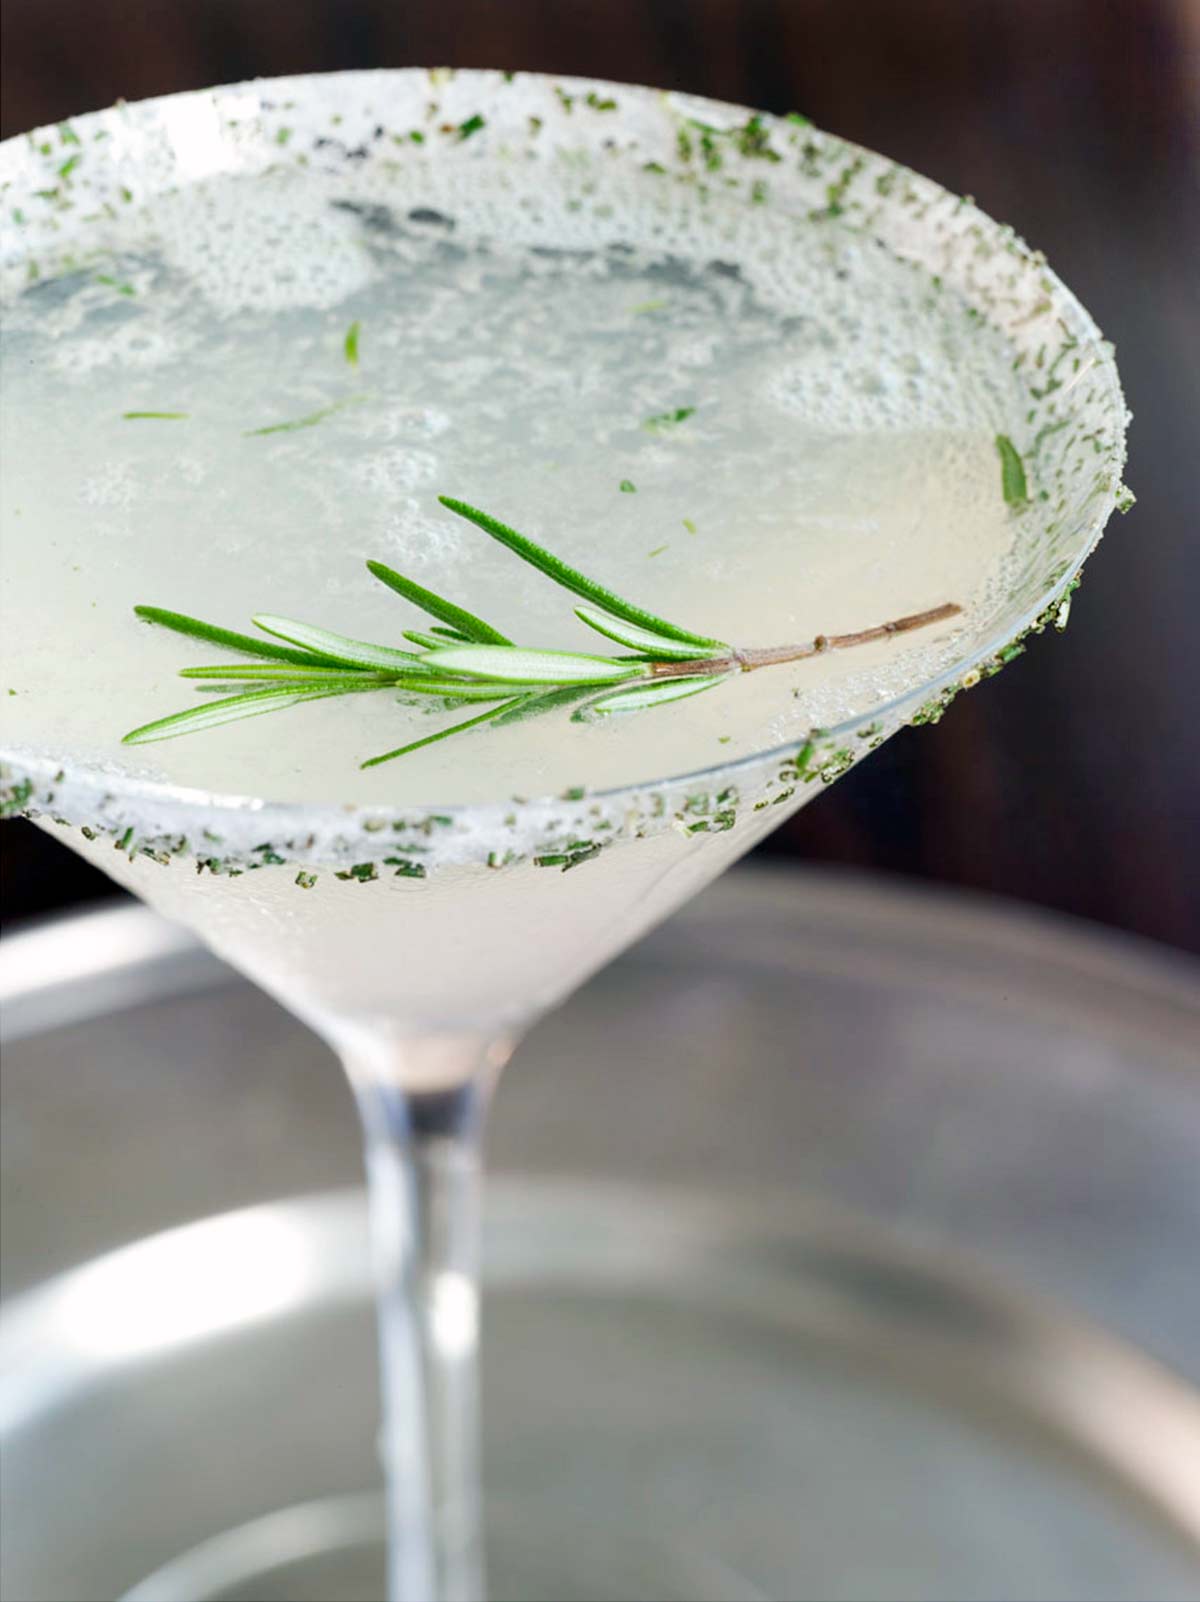 A martini glass filled with rosemary lemon drop with a sugared rosemary rim.